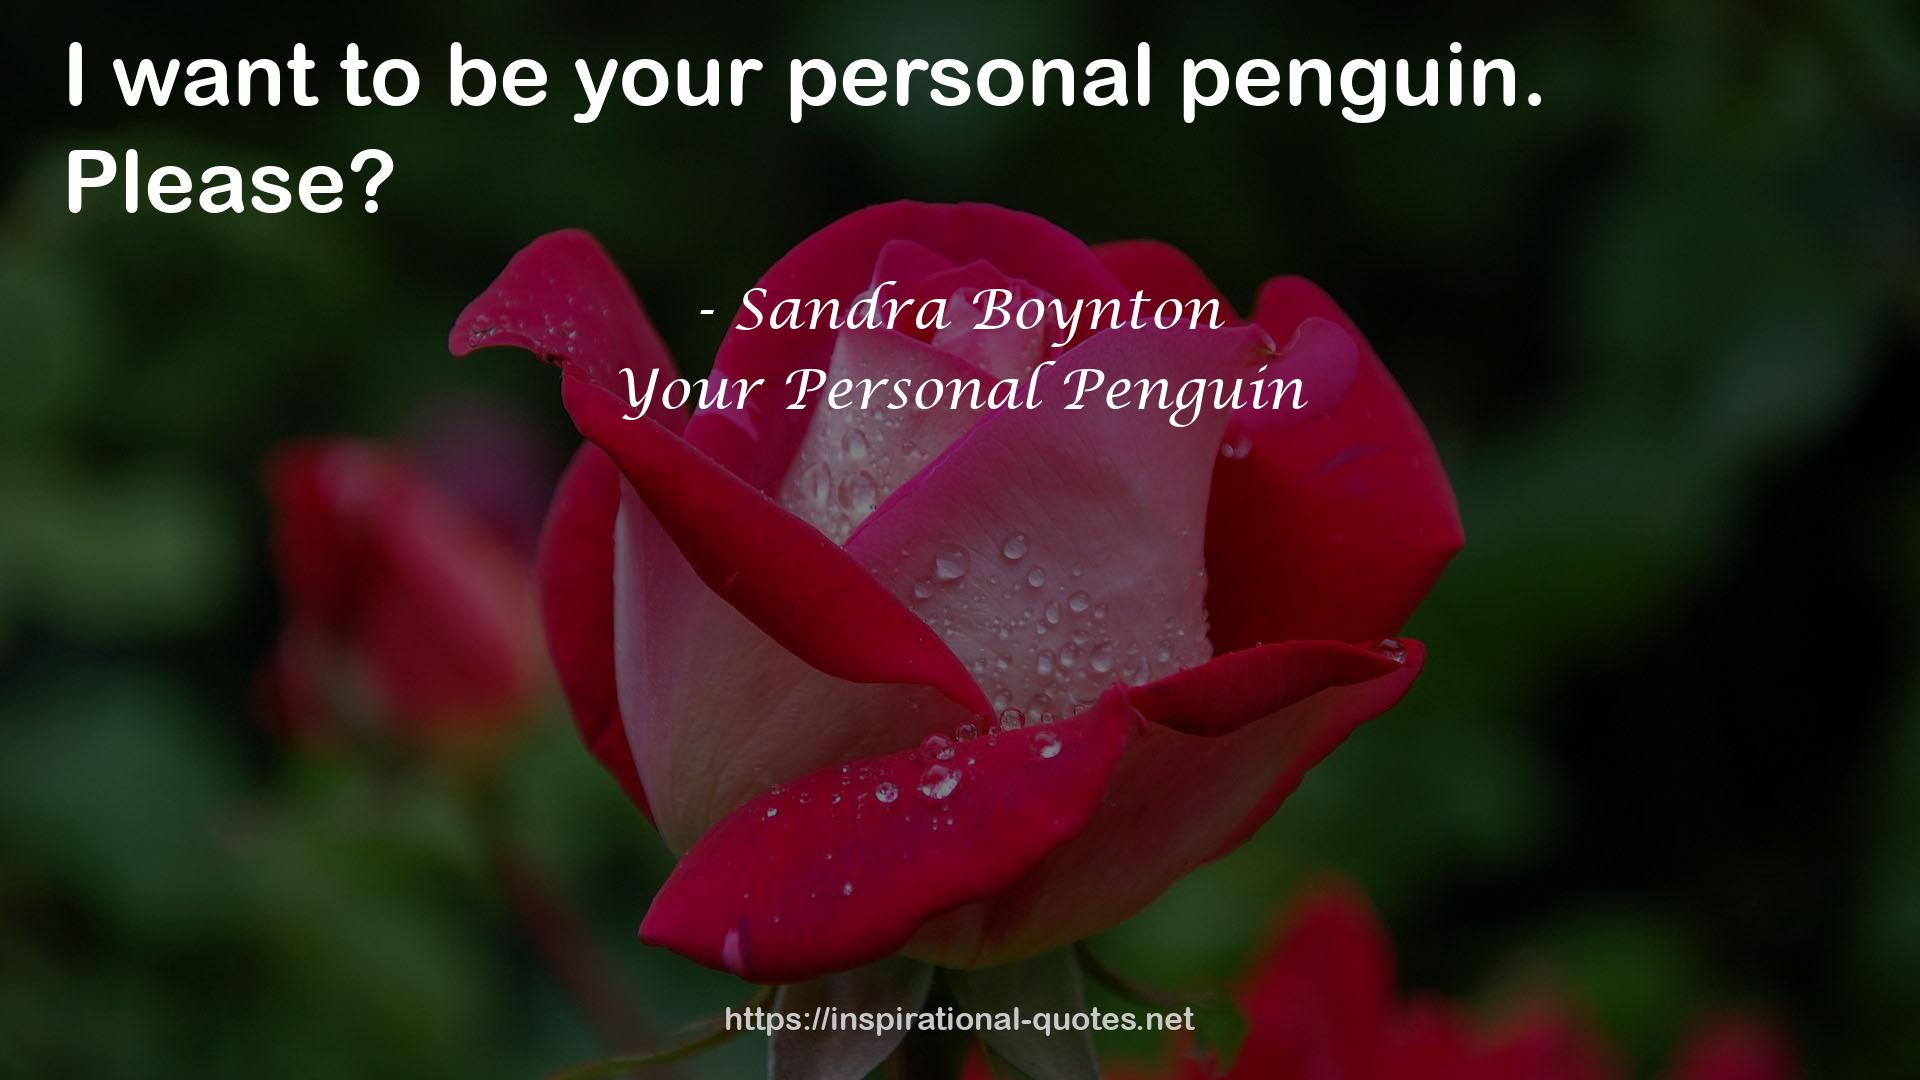 Your Personal Penguin QUOTES